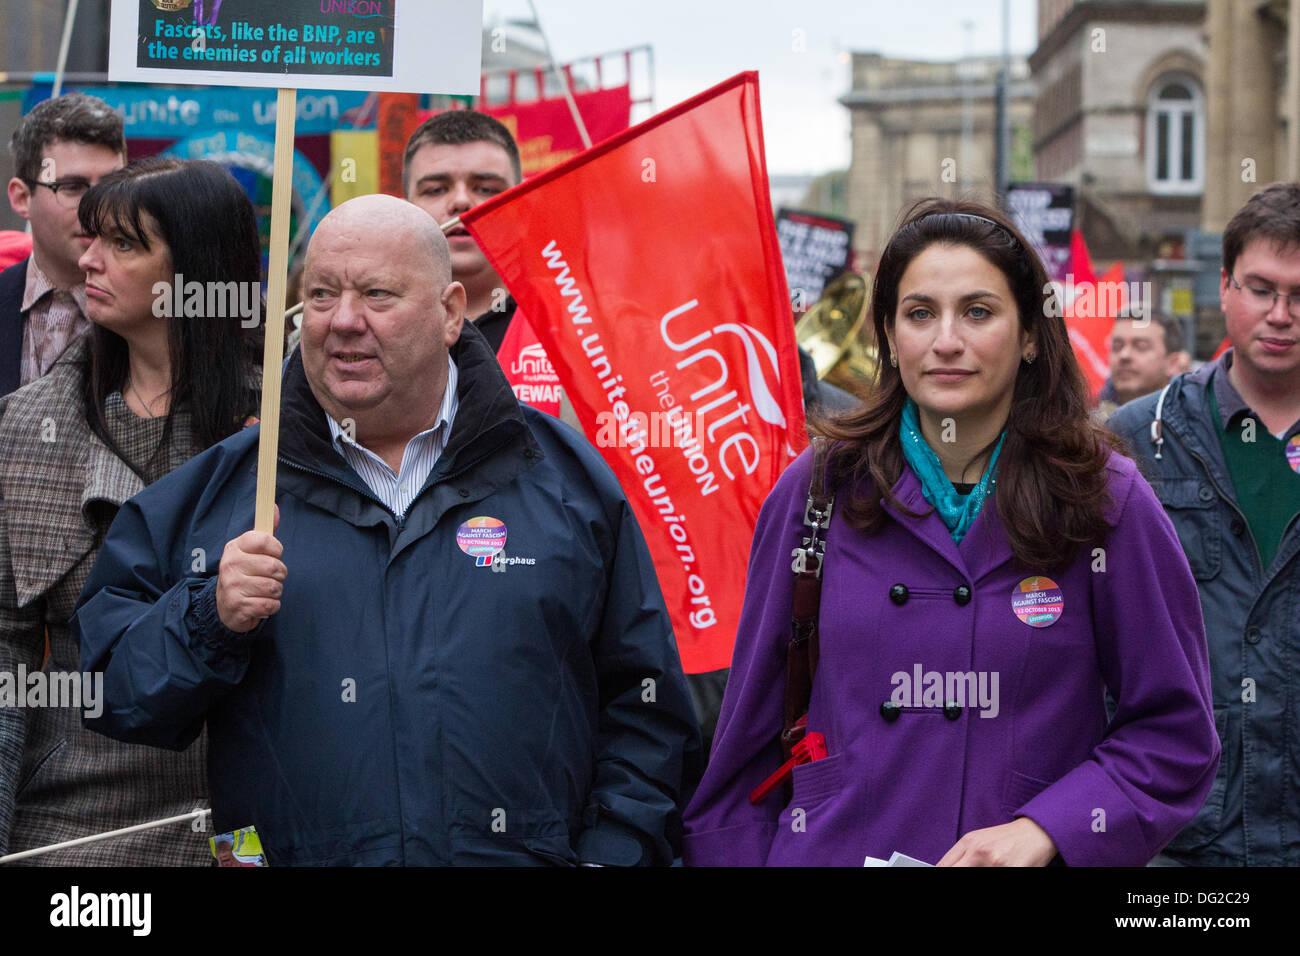 Hundreds of demonstrators accompanied by political figures including the Mayor of Liverpool Joe Anderson (left) and Shadow Minister for Public Health Luciana Berger (right) joined a march through Liverpool city centre on Saturday, October 12, 2013 which focused on the tagline 'Celebrating Not Dividing'. The demonstration which was called by Unite the Union, was held to spread the message that far-right British National Party (BNP) leader Nick Griffin must be defeated at the European Parliament elections in 2014. Stock Photo